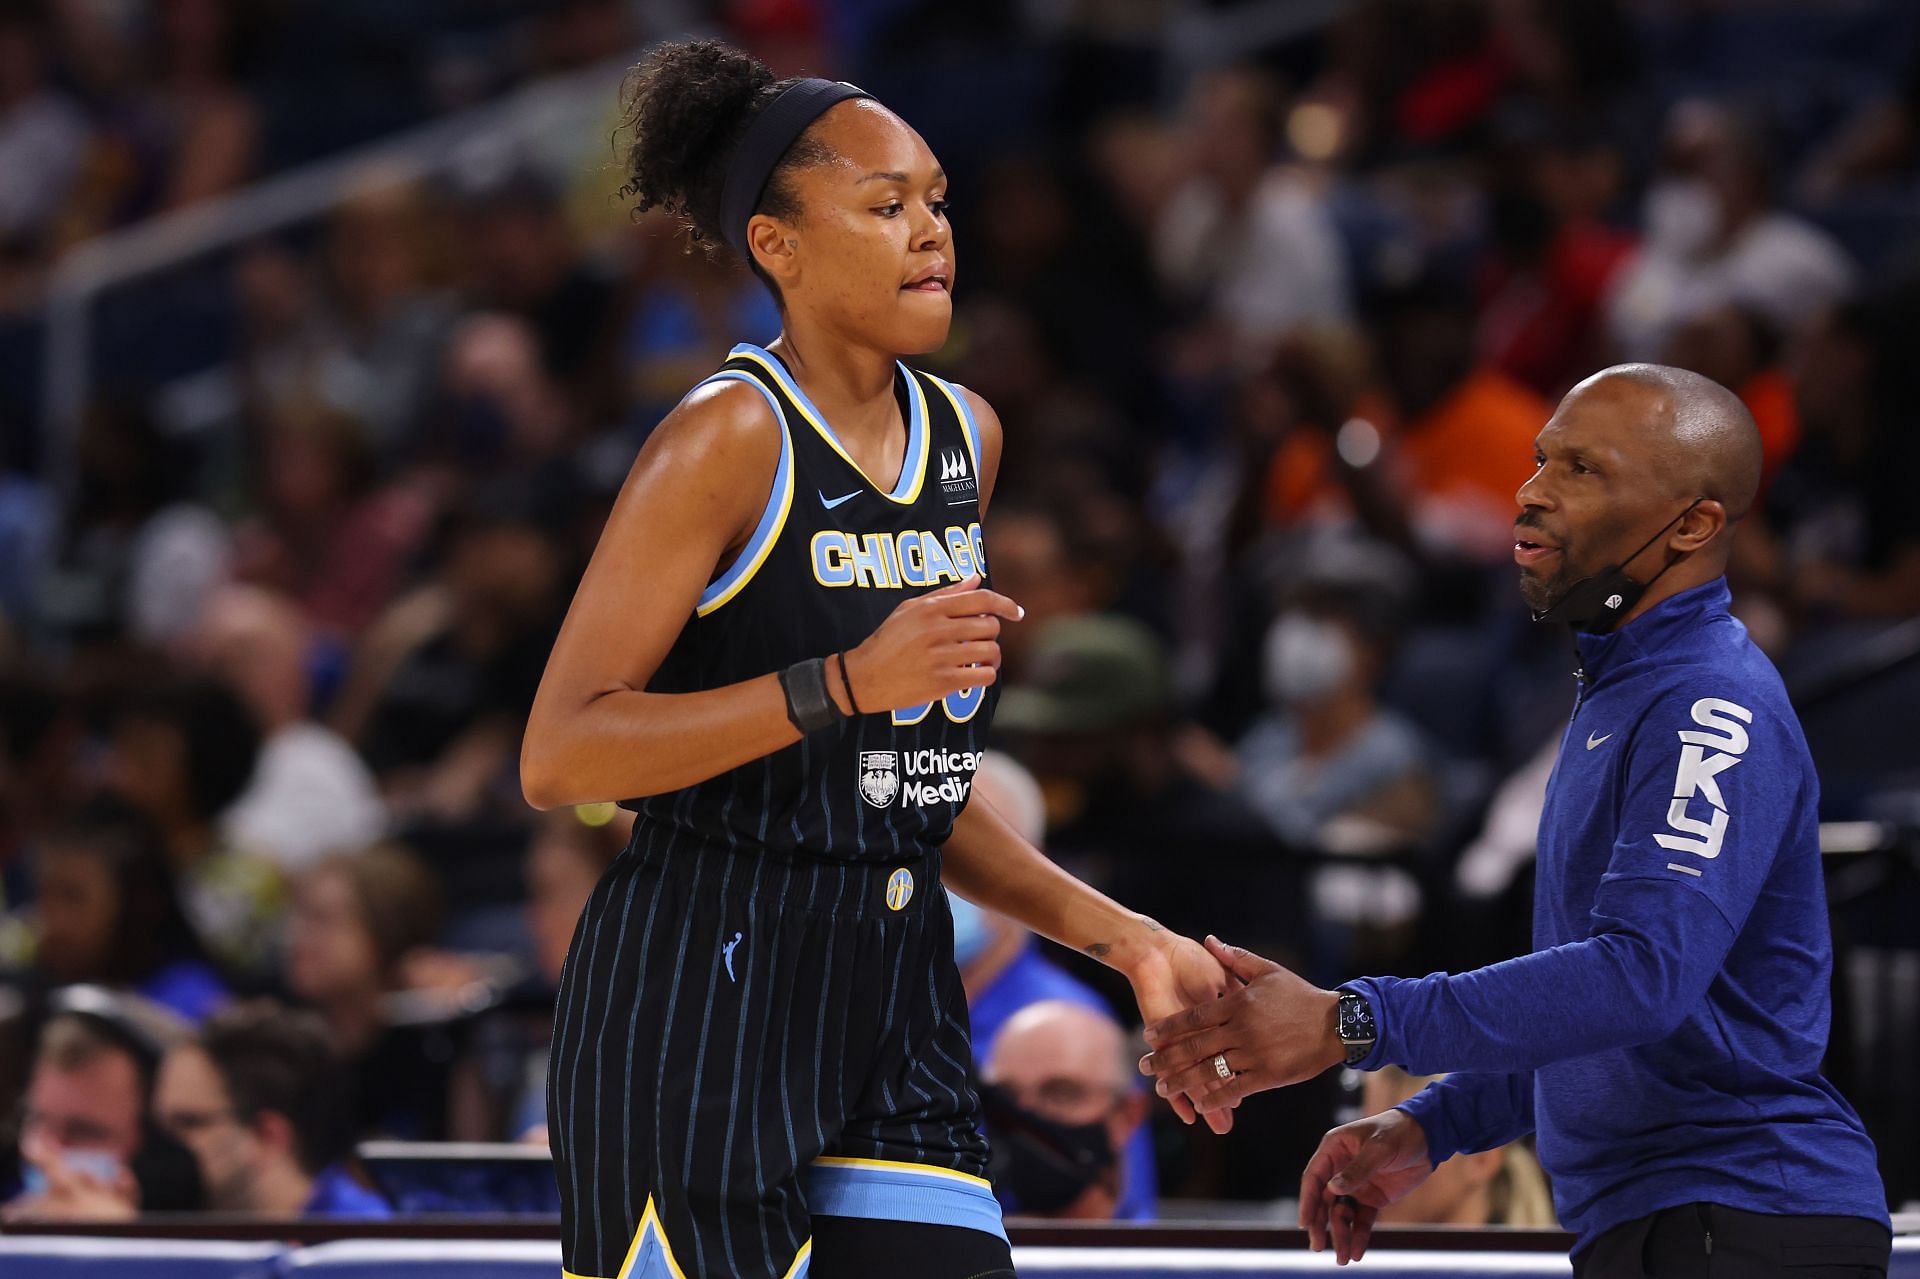 Chicago Sky vs. Connecticut Sun Odds, Line, Picks, and Prediction